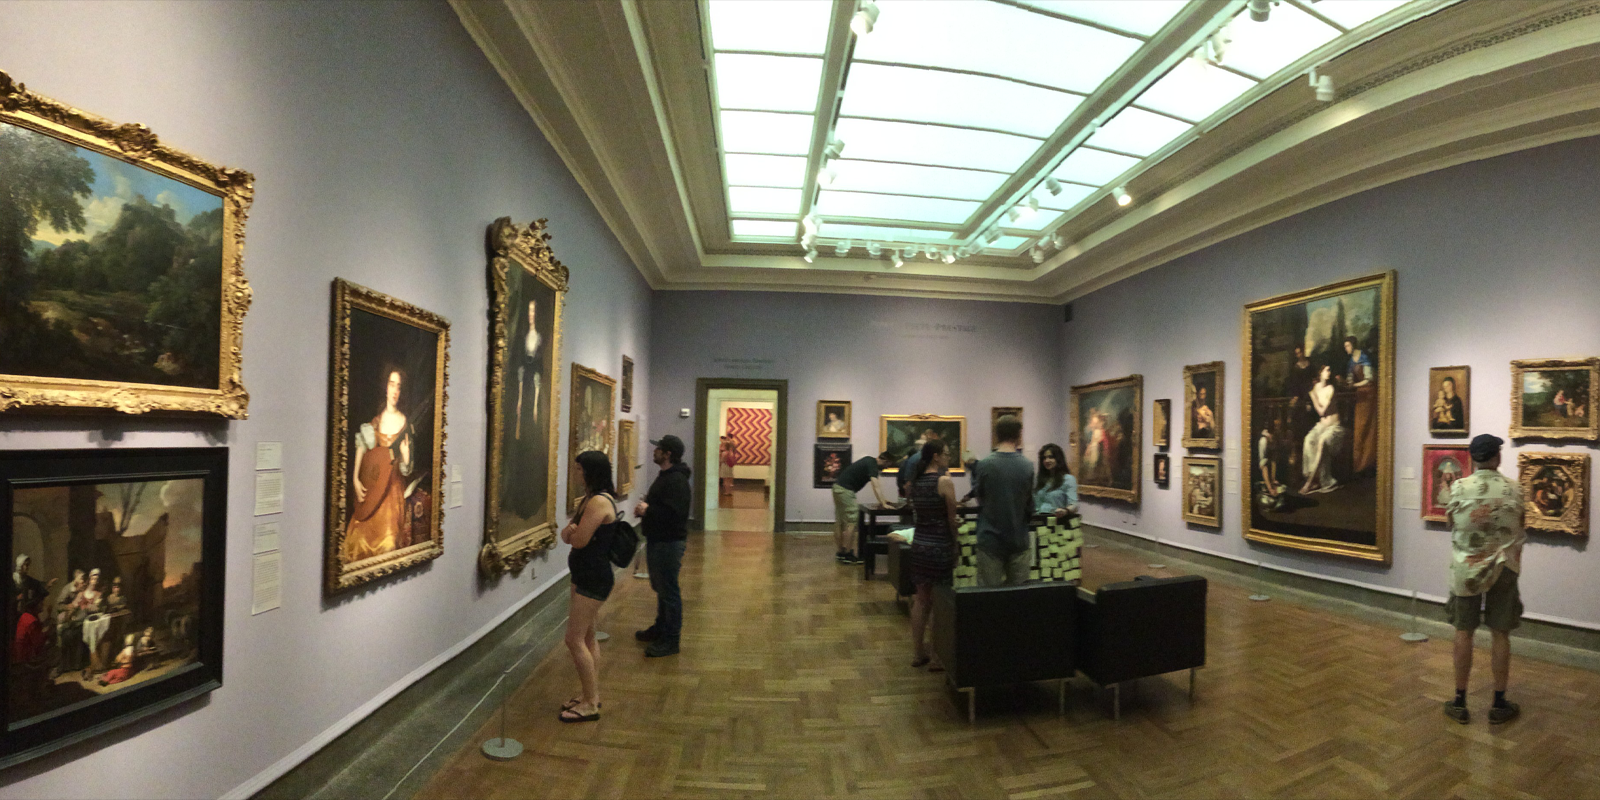 Columbus Museum of Art employees seek voluntary recognition from museum trustees